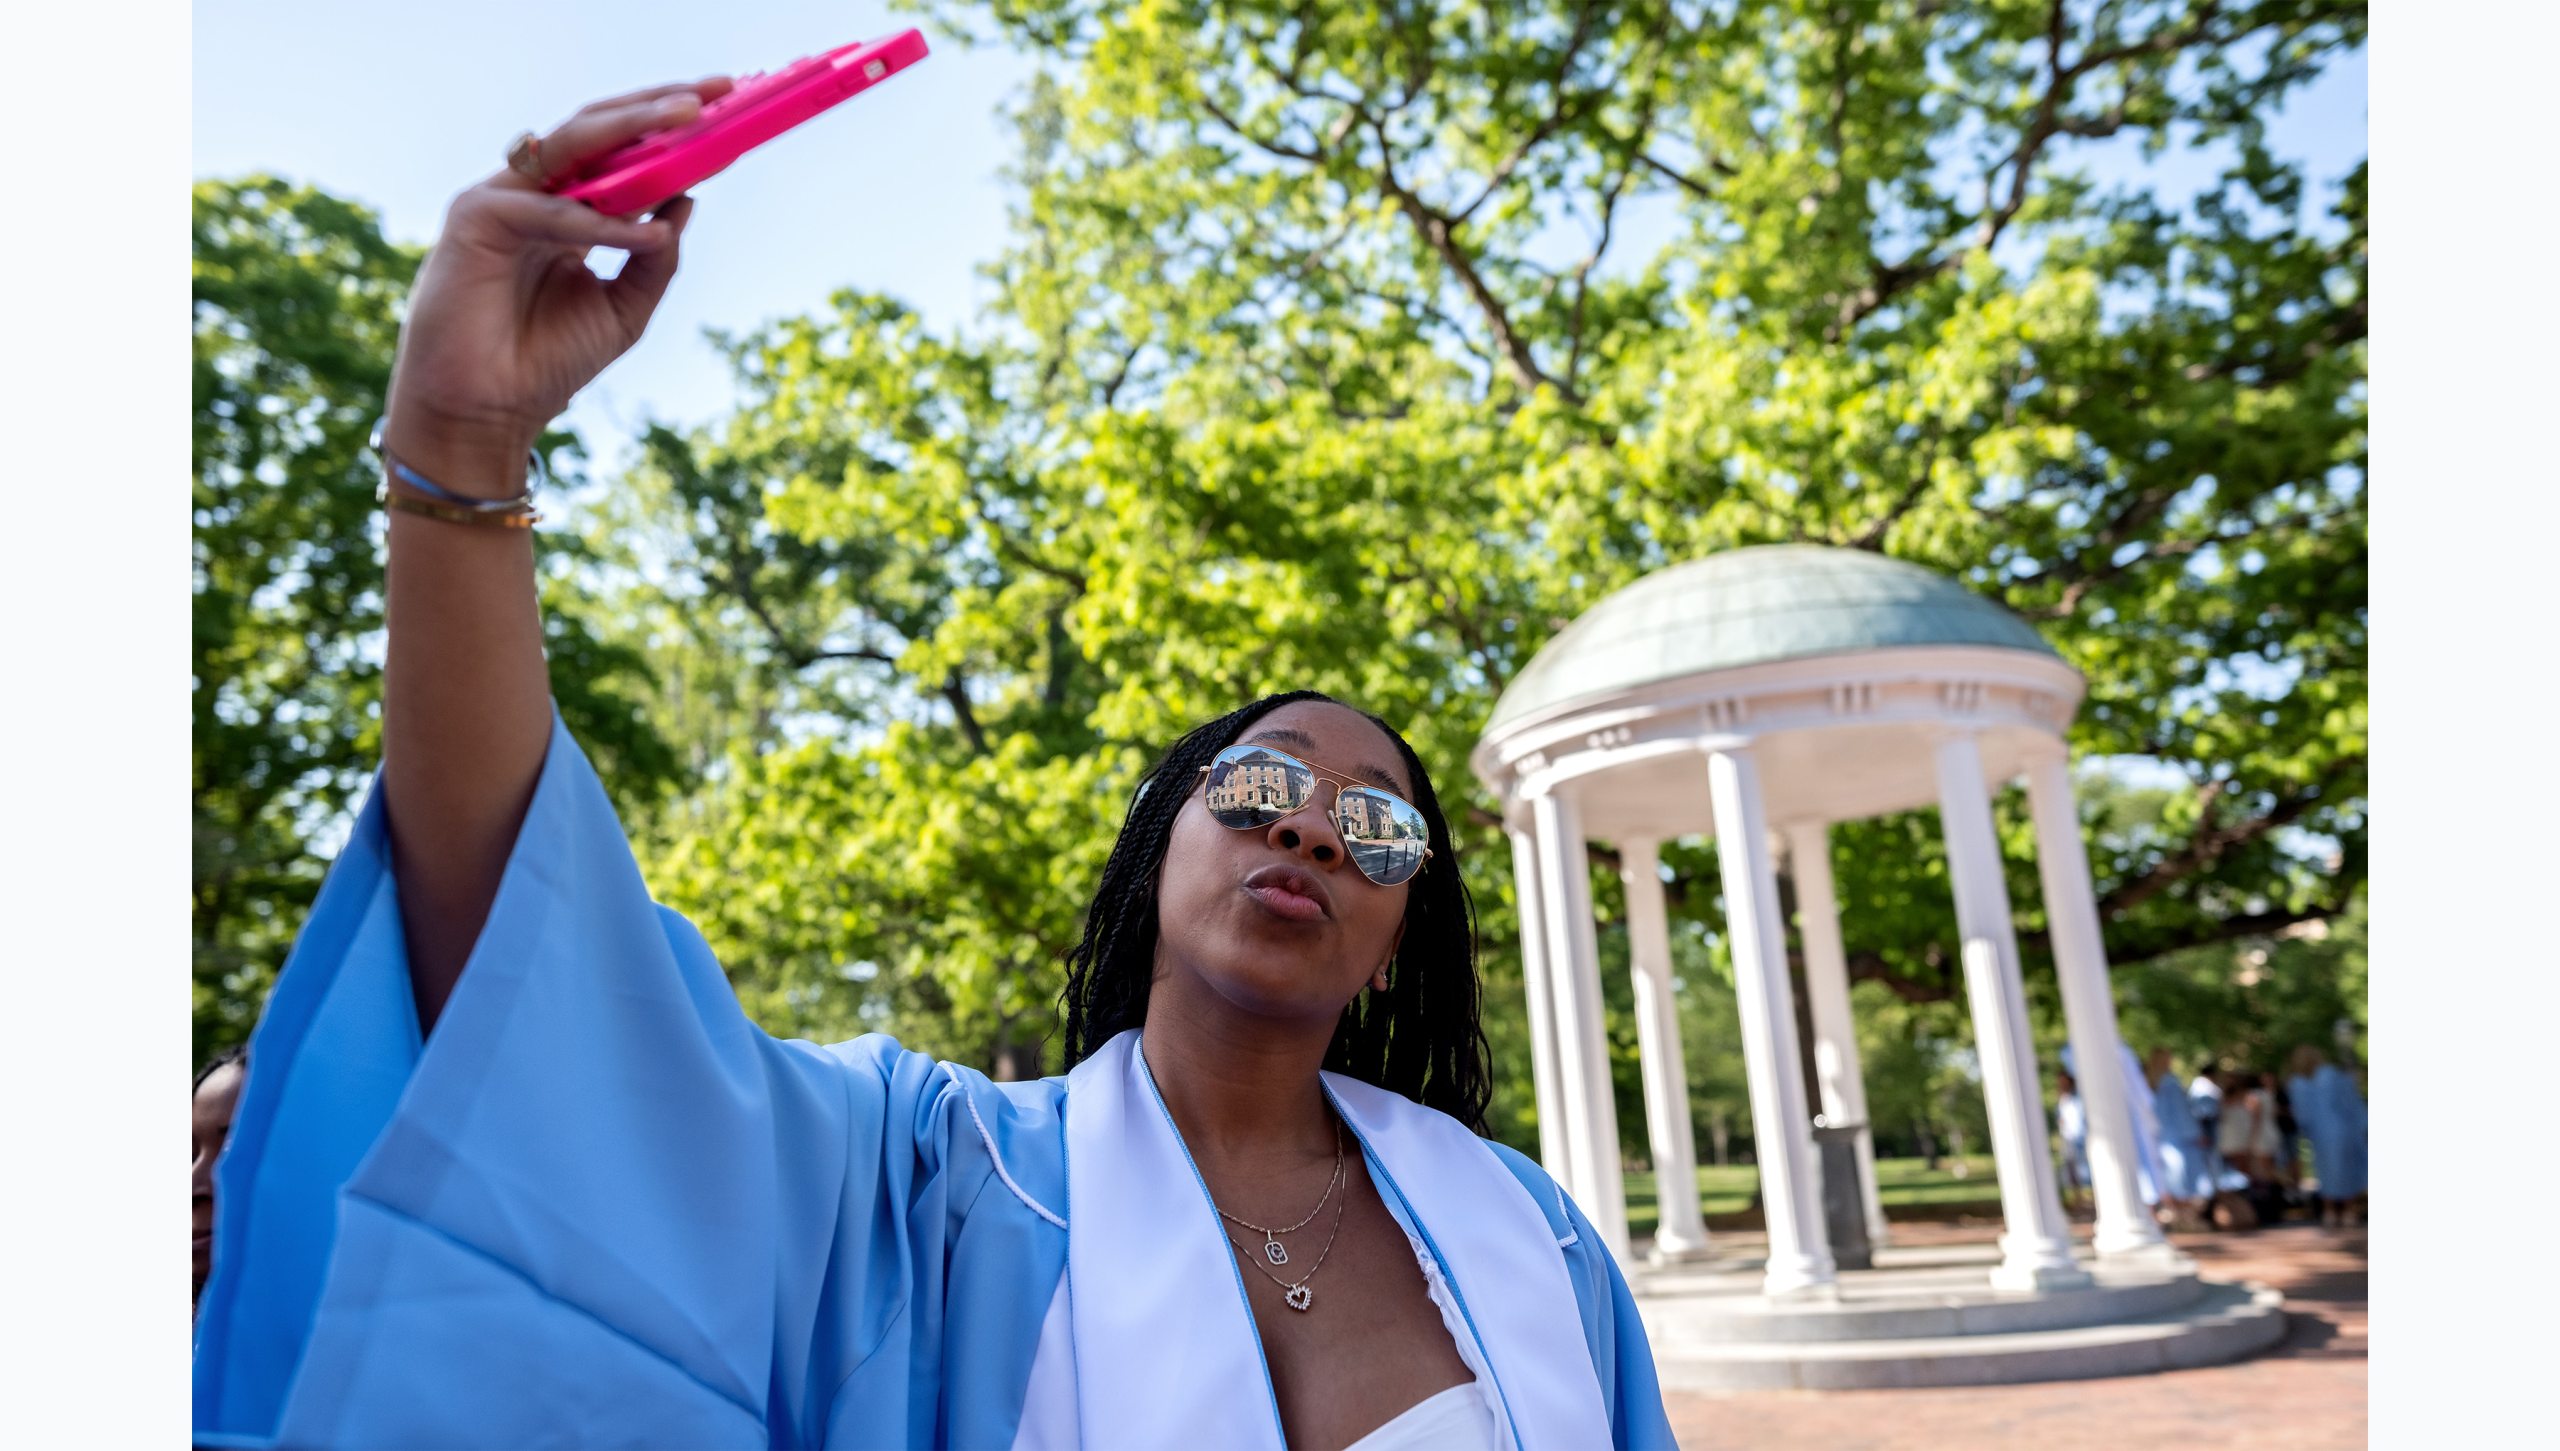 A student taking a selfie in her regalia near the Old Well.